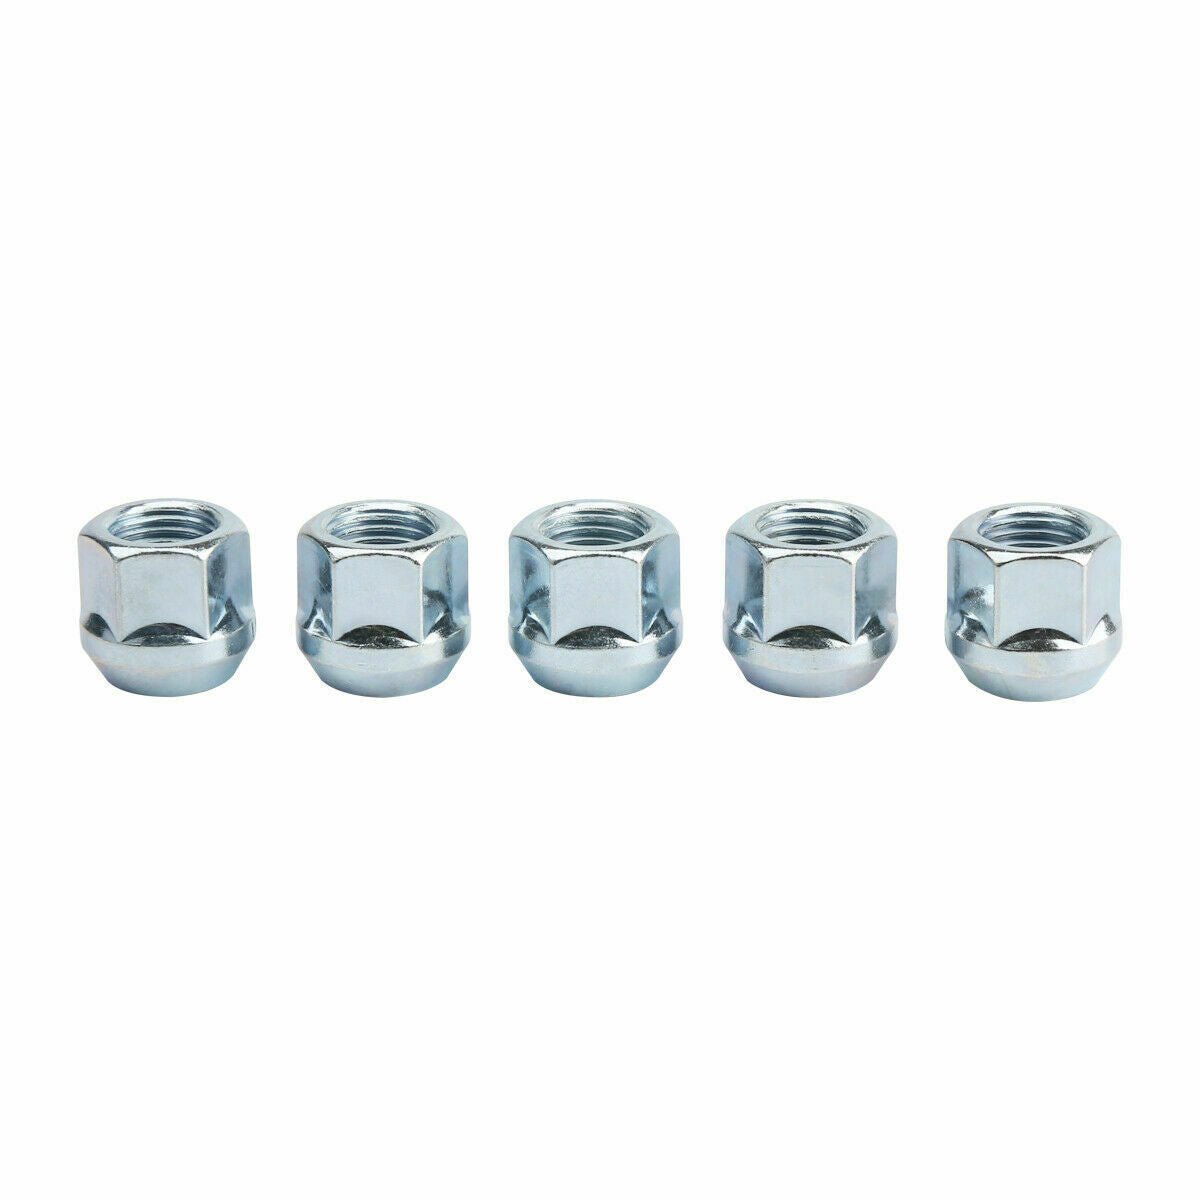 32pcs  For DODGE FORD Open End 9/16-18 Acorn Lug Nuts Cone Seat 3/4" Hex xccscss.